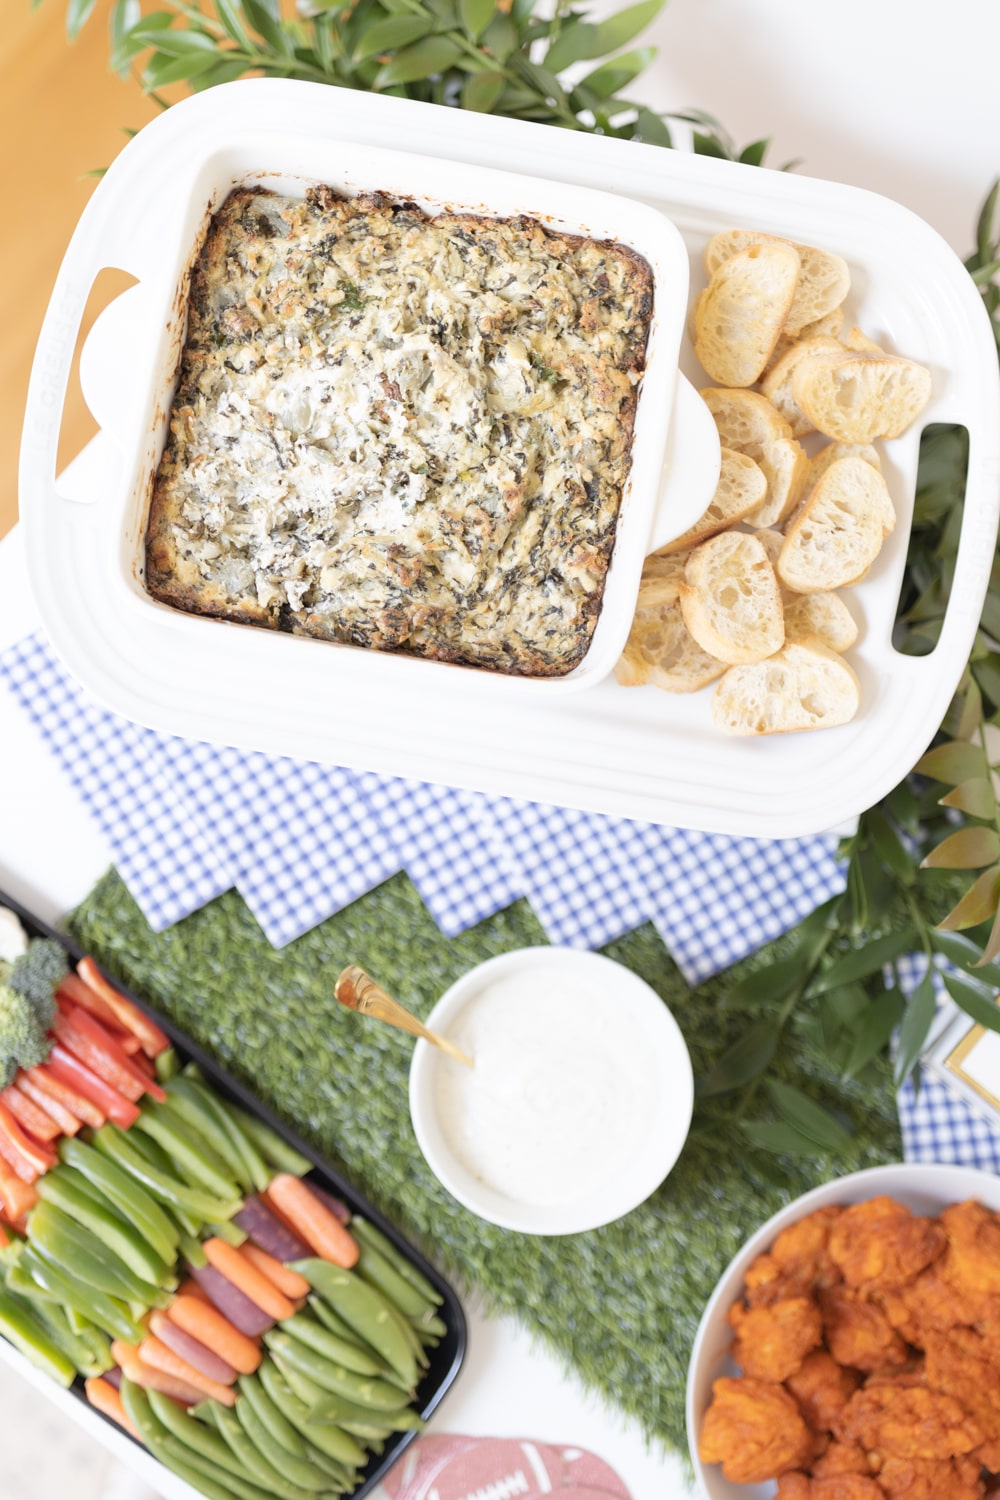 Game day appetizers made by blogger Stephanie Ziajka on Diary of a Debutante